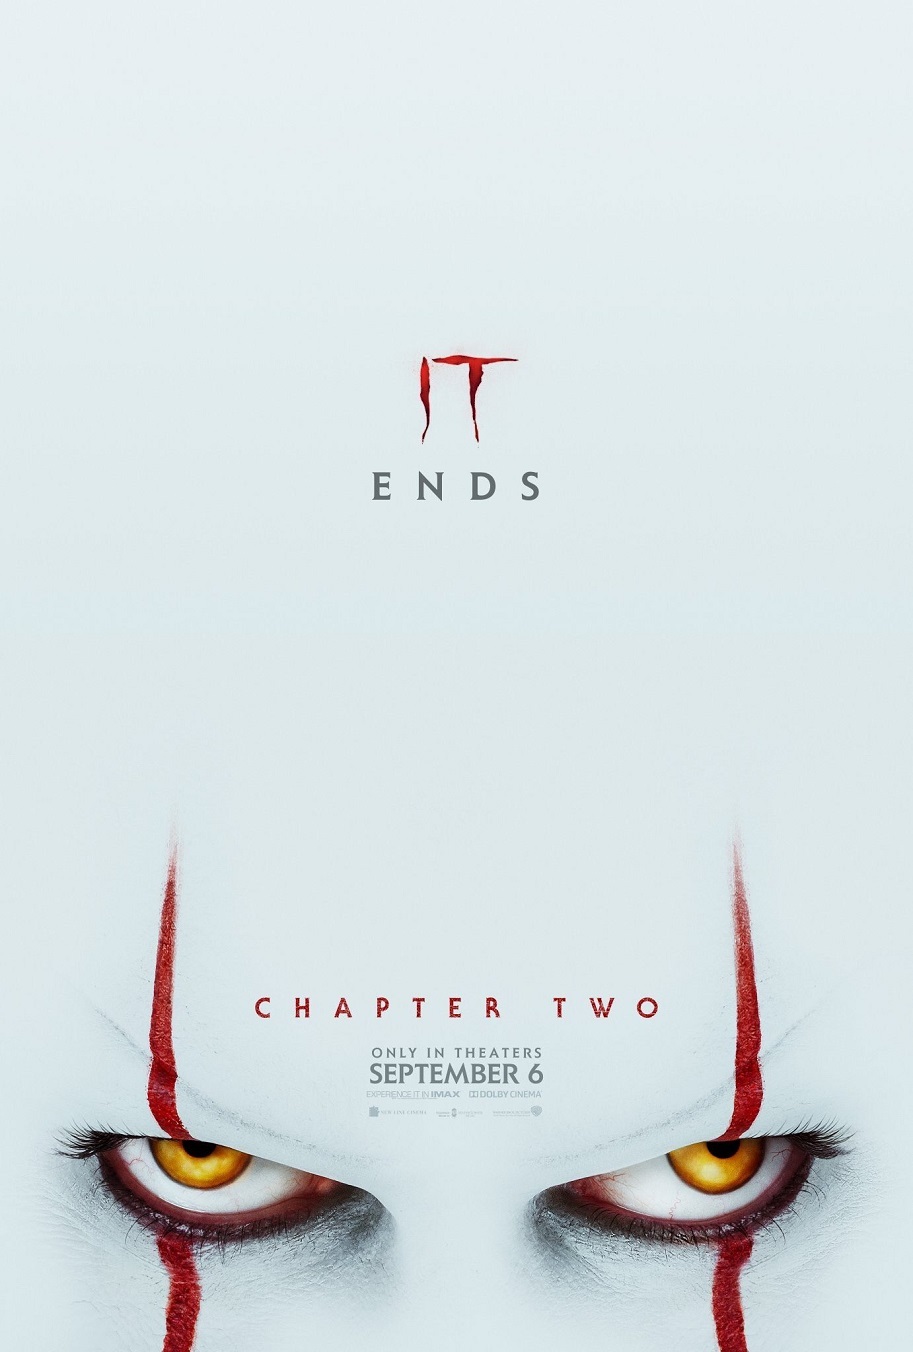 Horror, It: Chapter Two, Stephen King